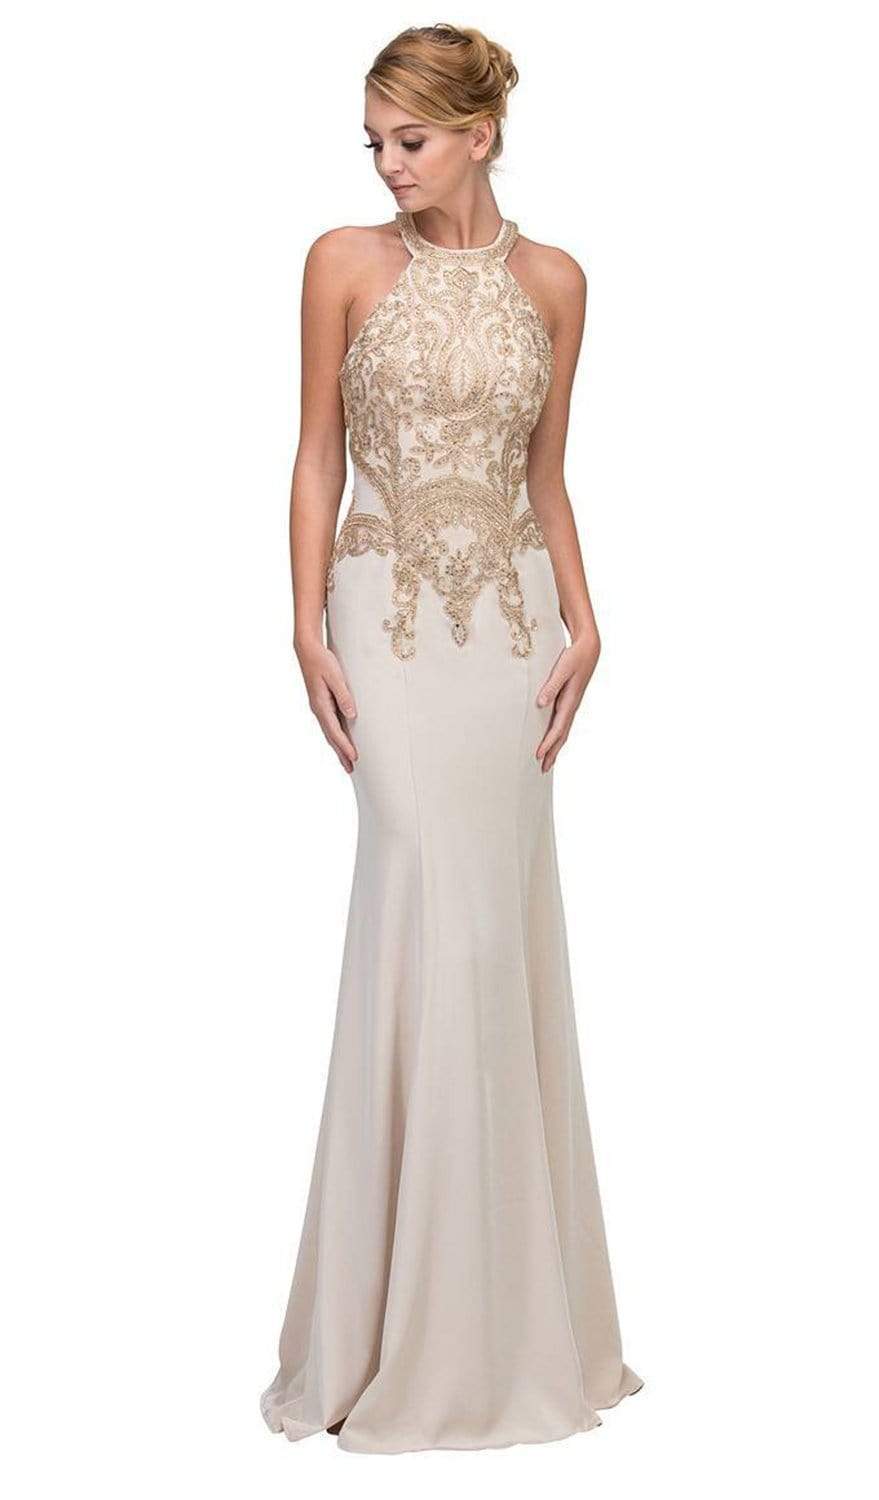 Image of Eureka Fashion - 7033 Embroidered Appliqued Mermaid Gown